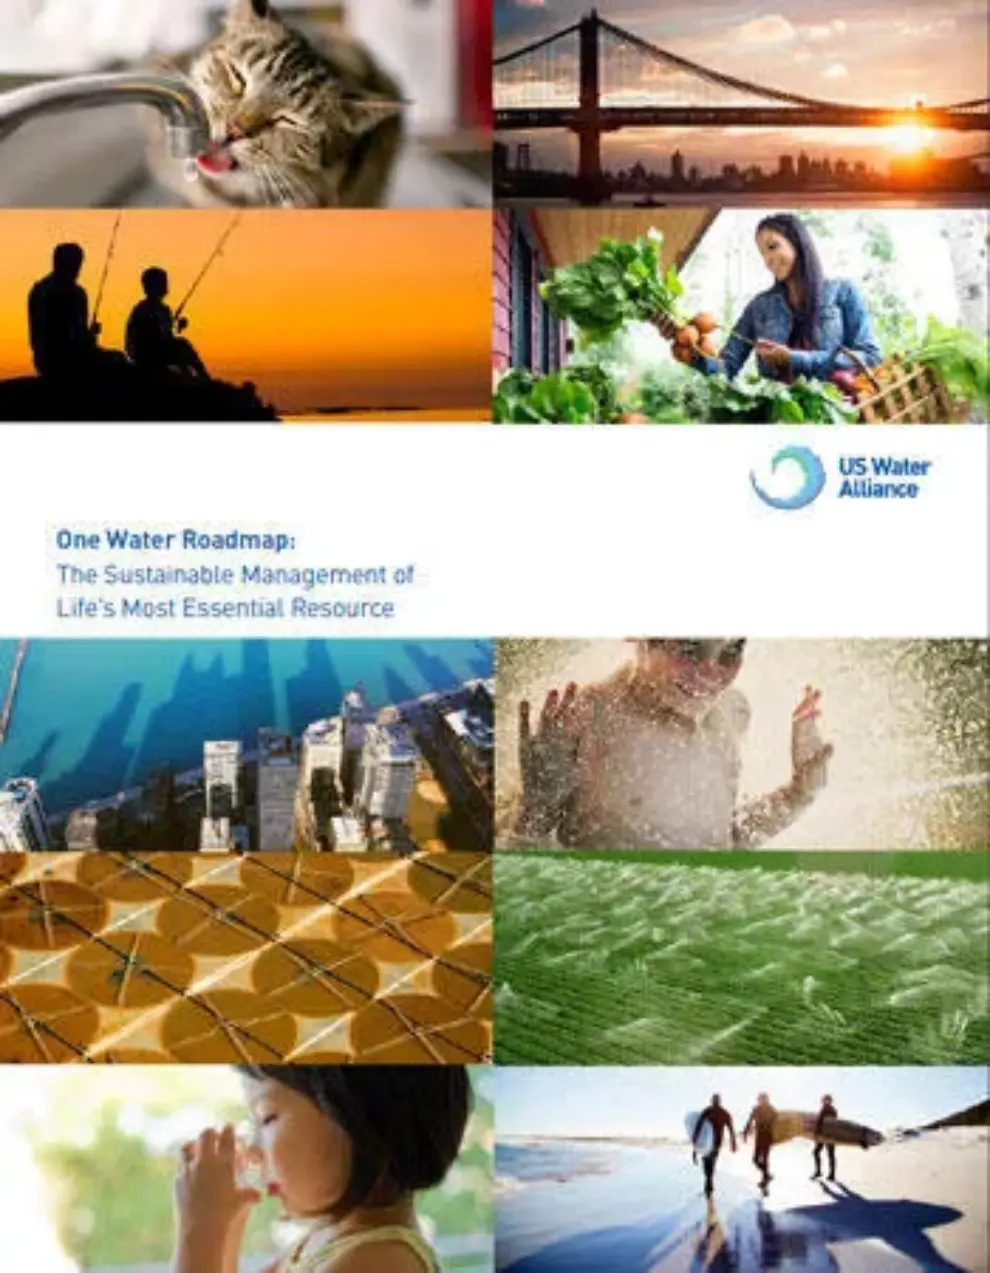 US Water Alliance releases report charting new path for managing water across the country